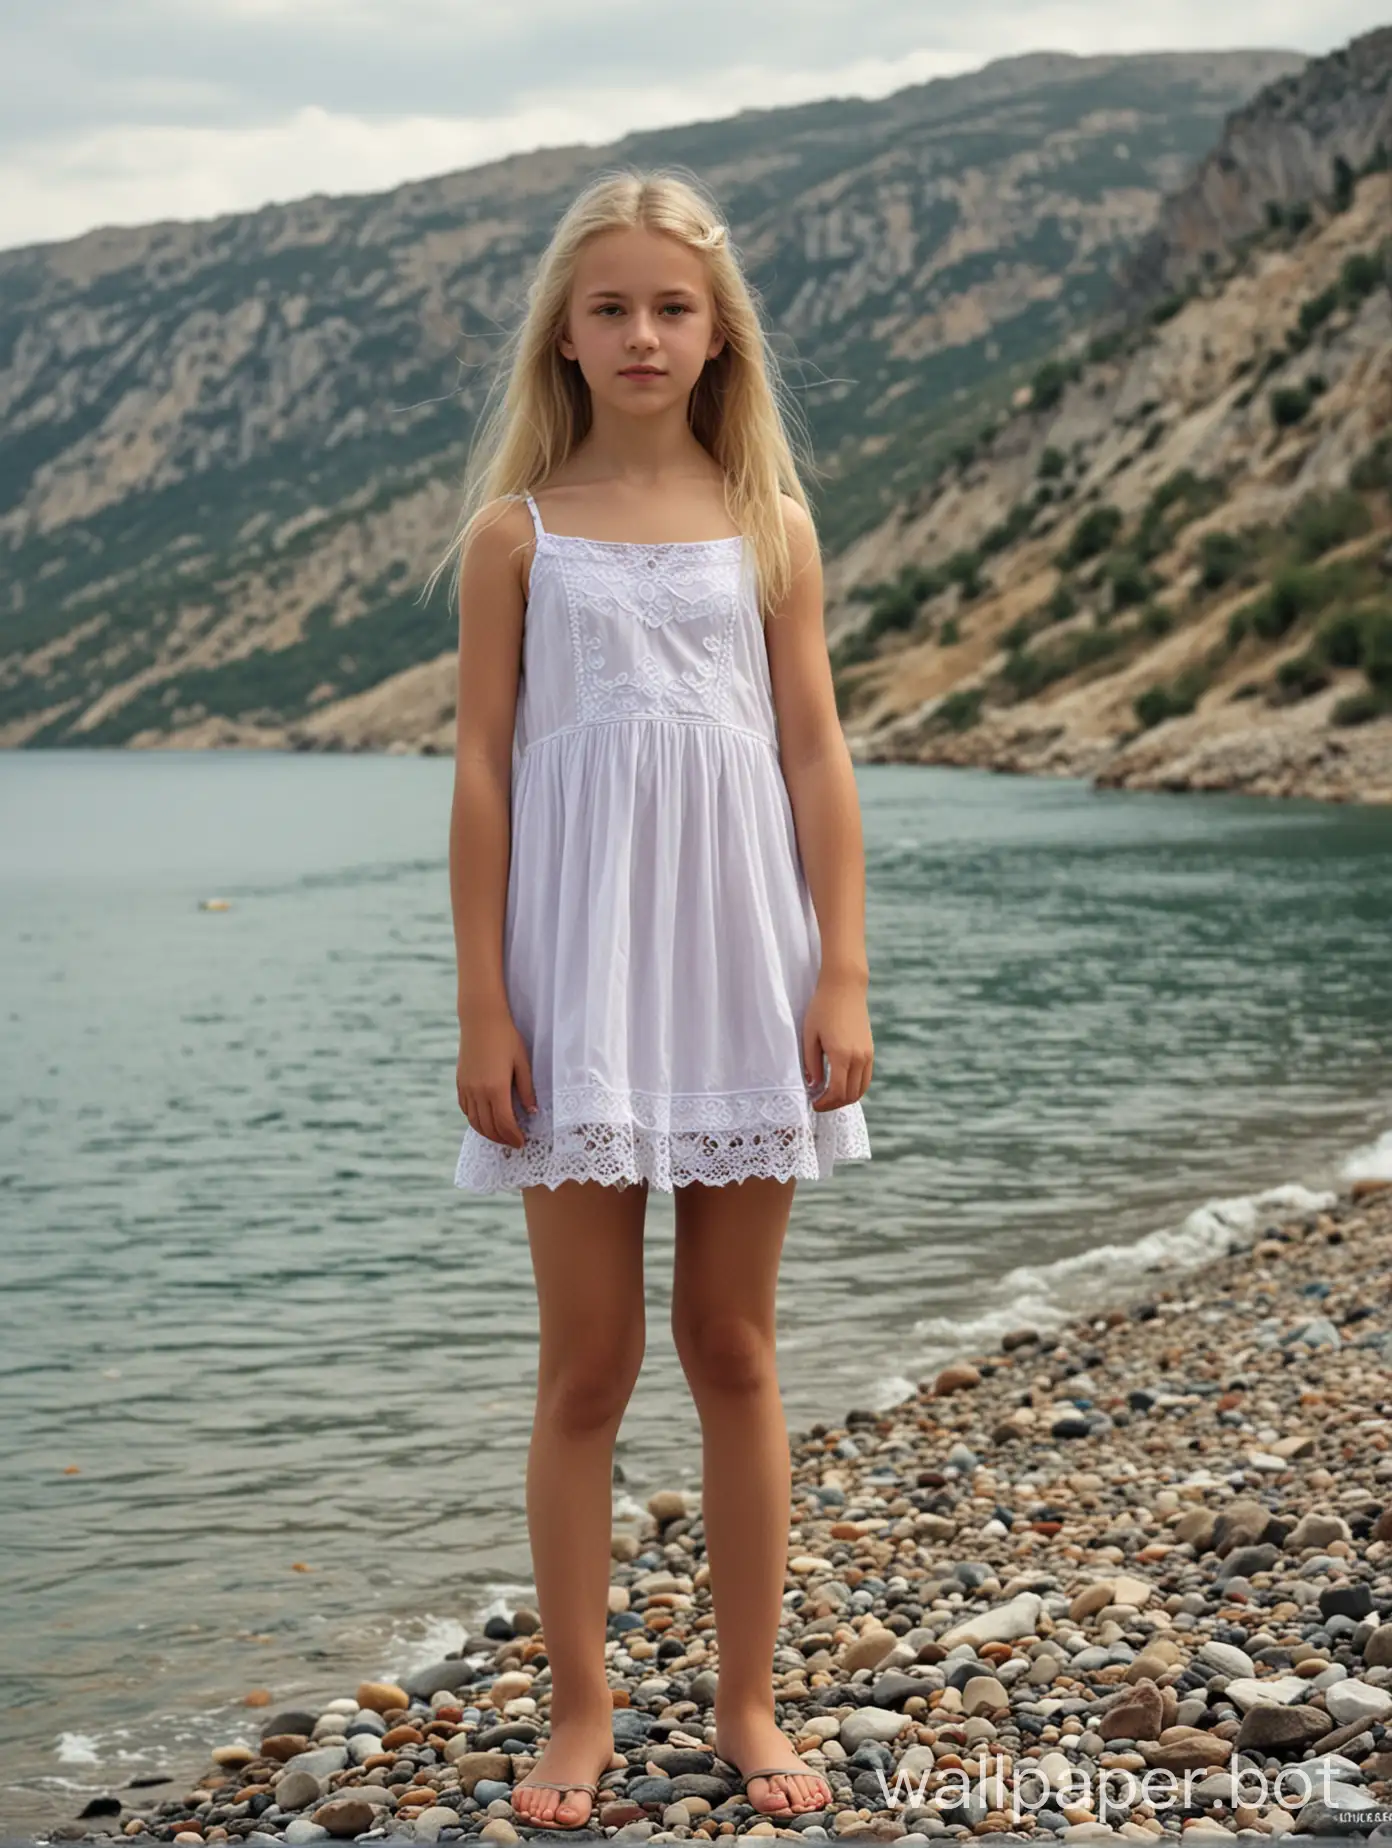 Russian-Beauty-with-Long-Blonde-Hair-in-Short-Dress-Amidst-Crimeas-Mountains-and-Sea